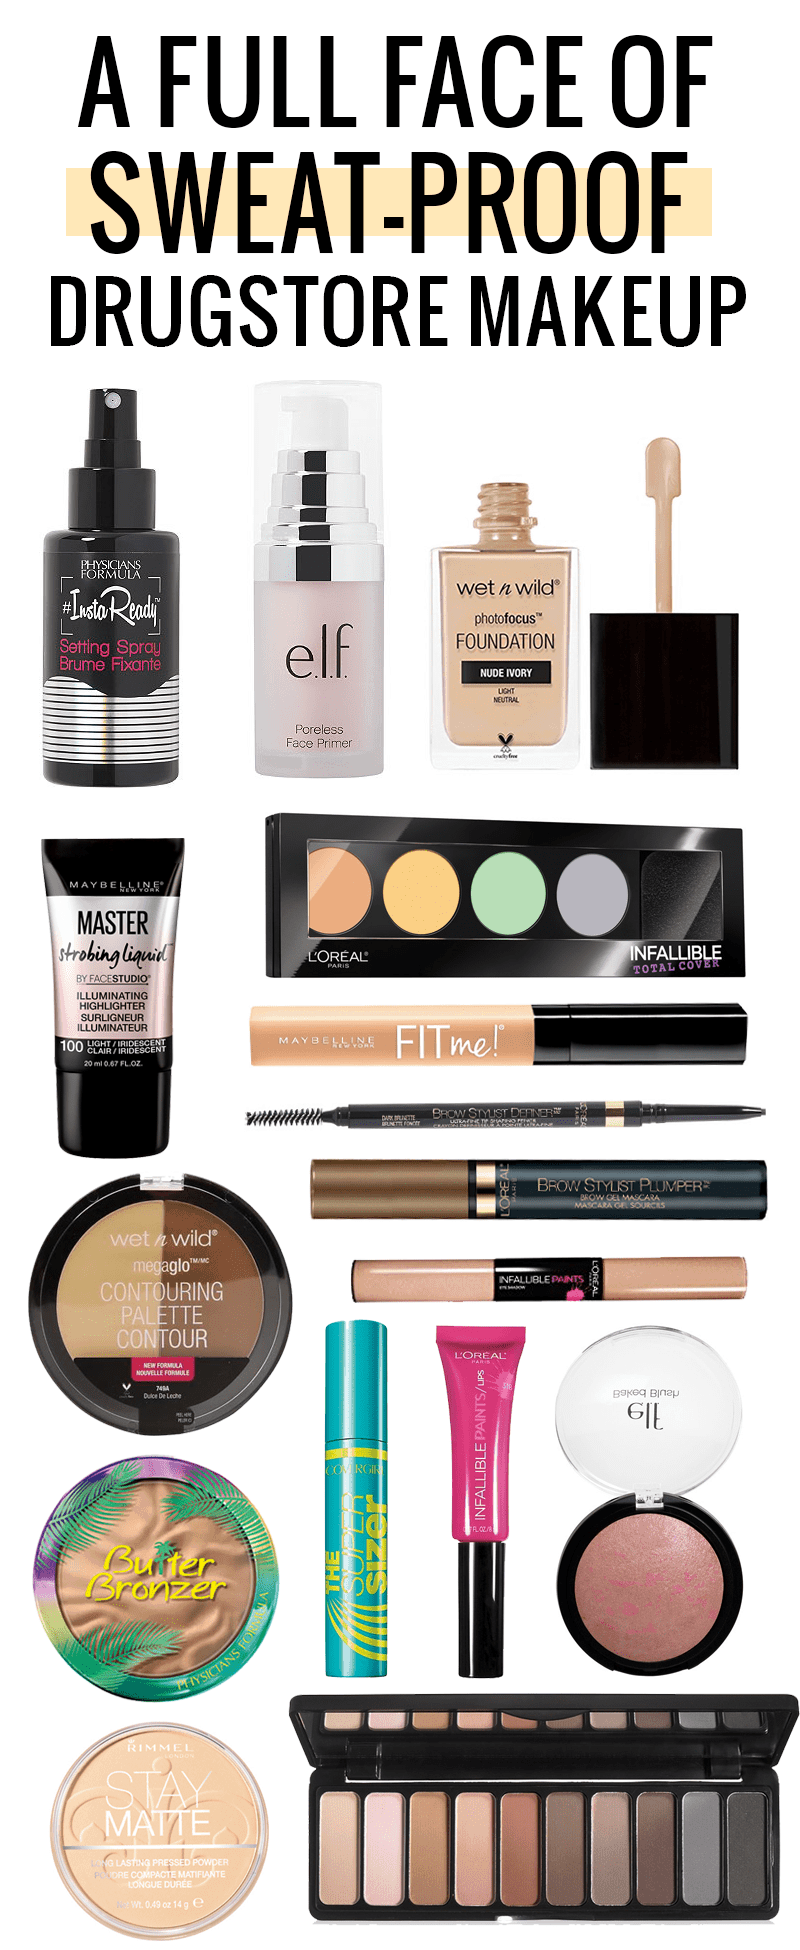 A full face of sweat-proof drugstore makeup! Click through to see the tutorial!